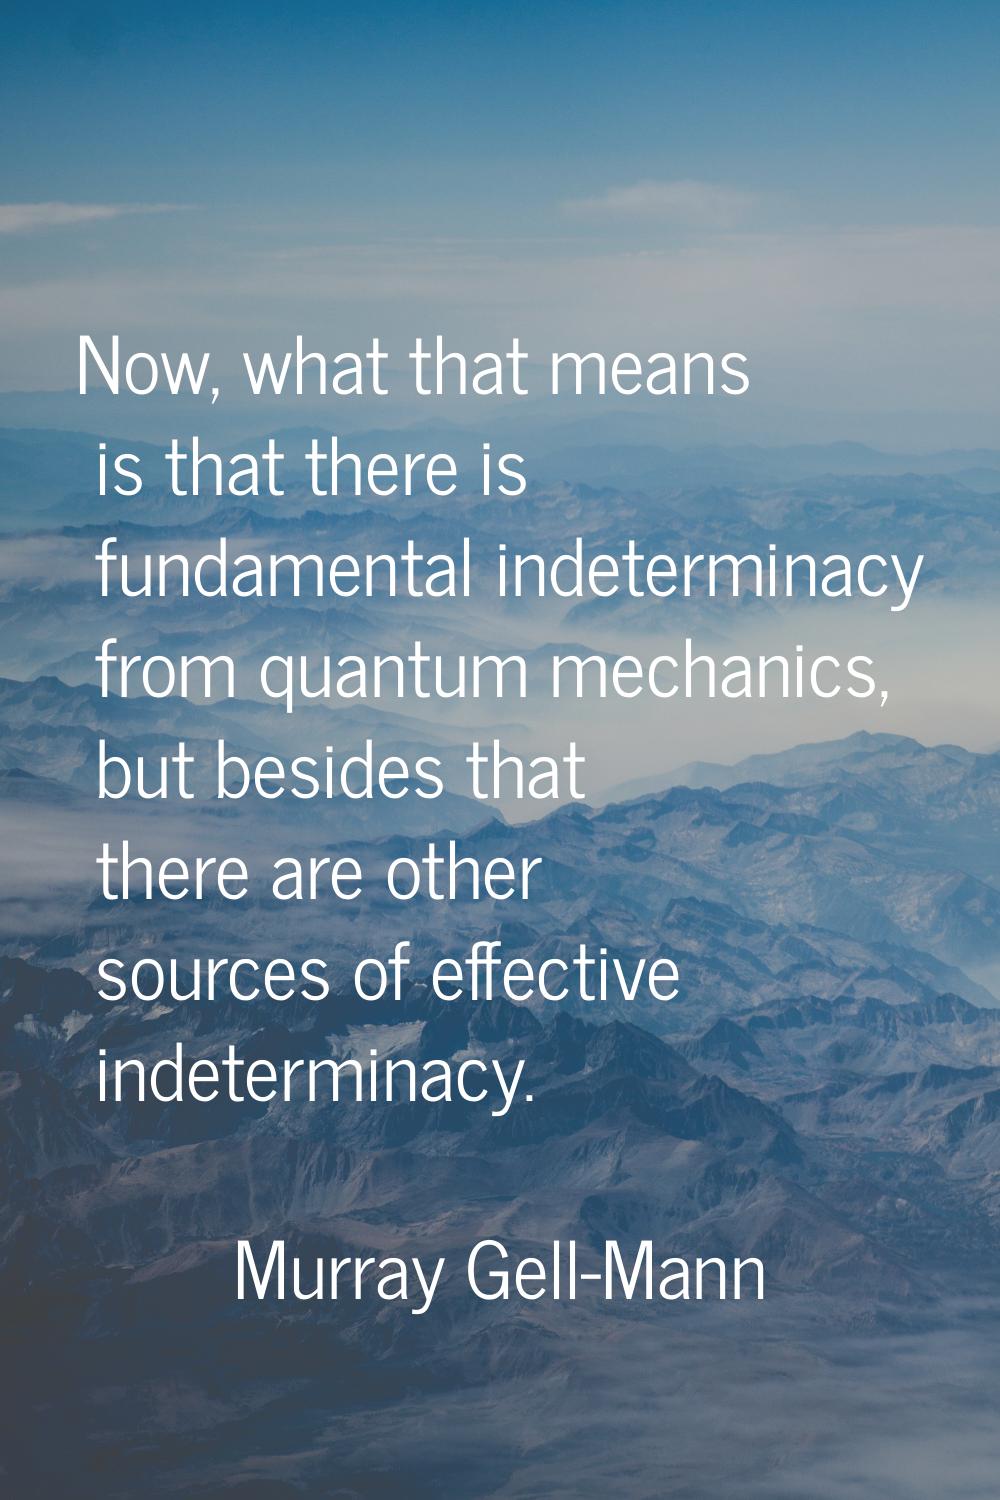 Now, what that means is that there is fundamental indeterminacy from quantum mechanics, but besides